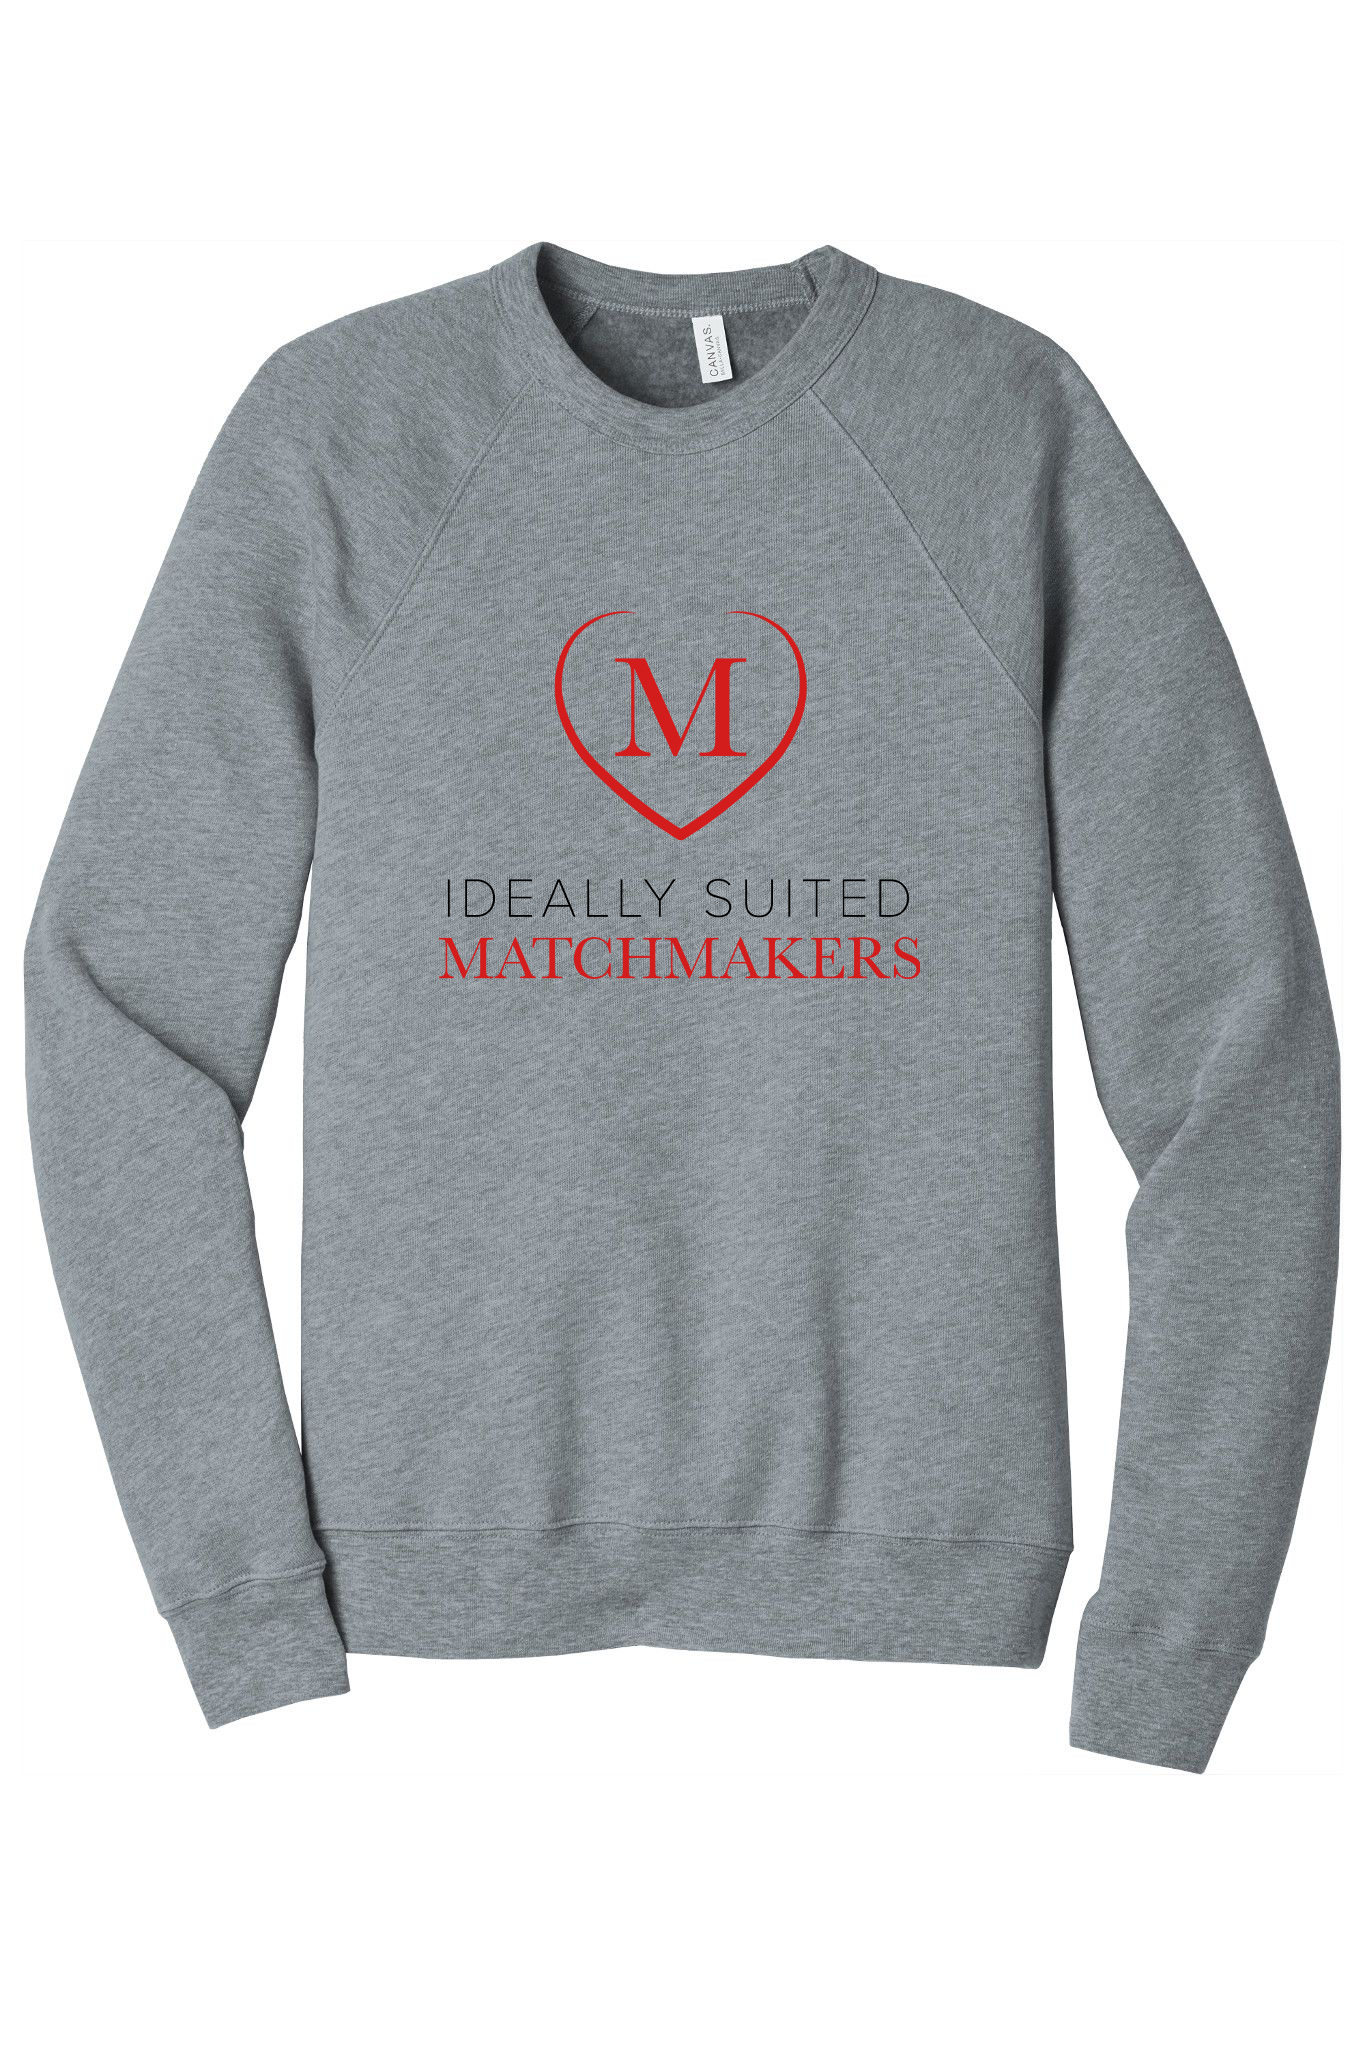 Ideally Suited Matchmakers Dressing Festive  grey crew